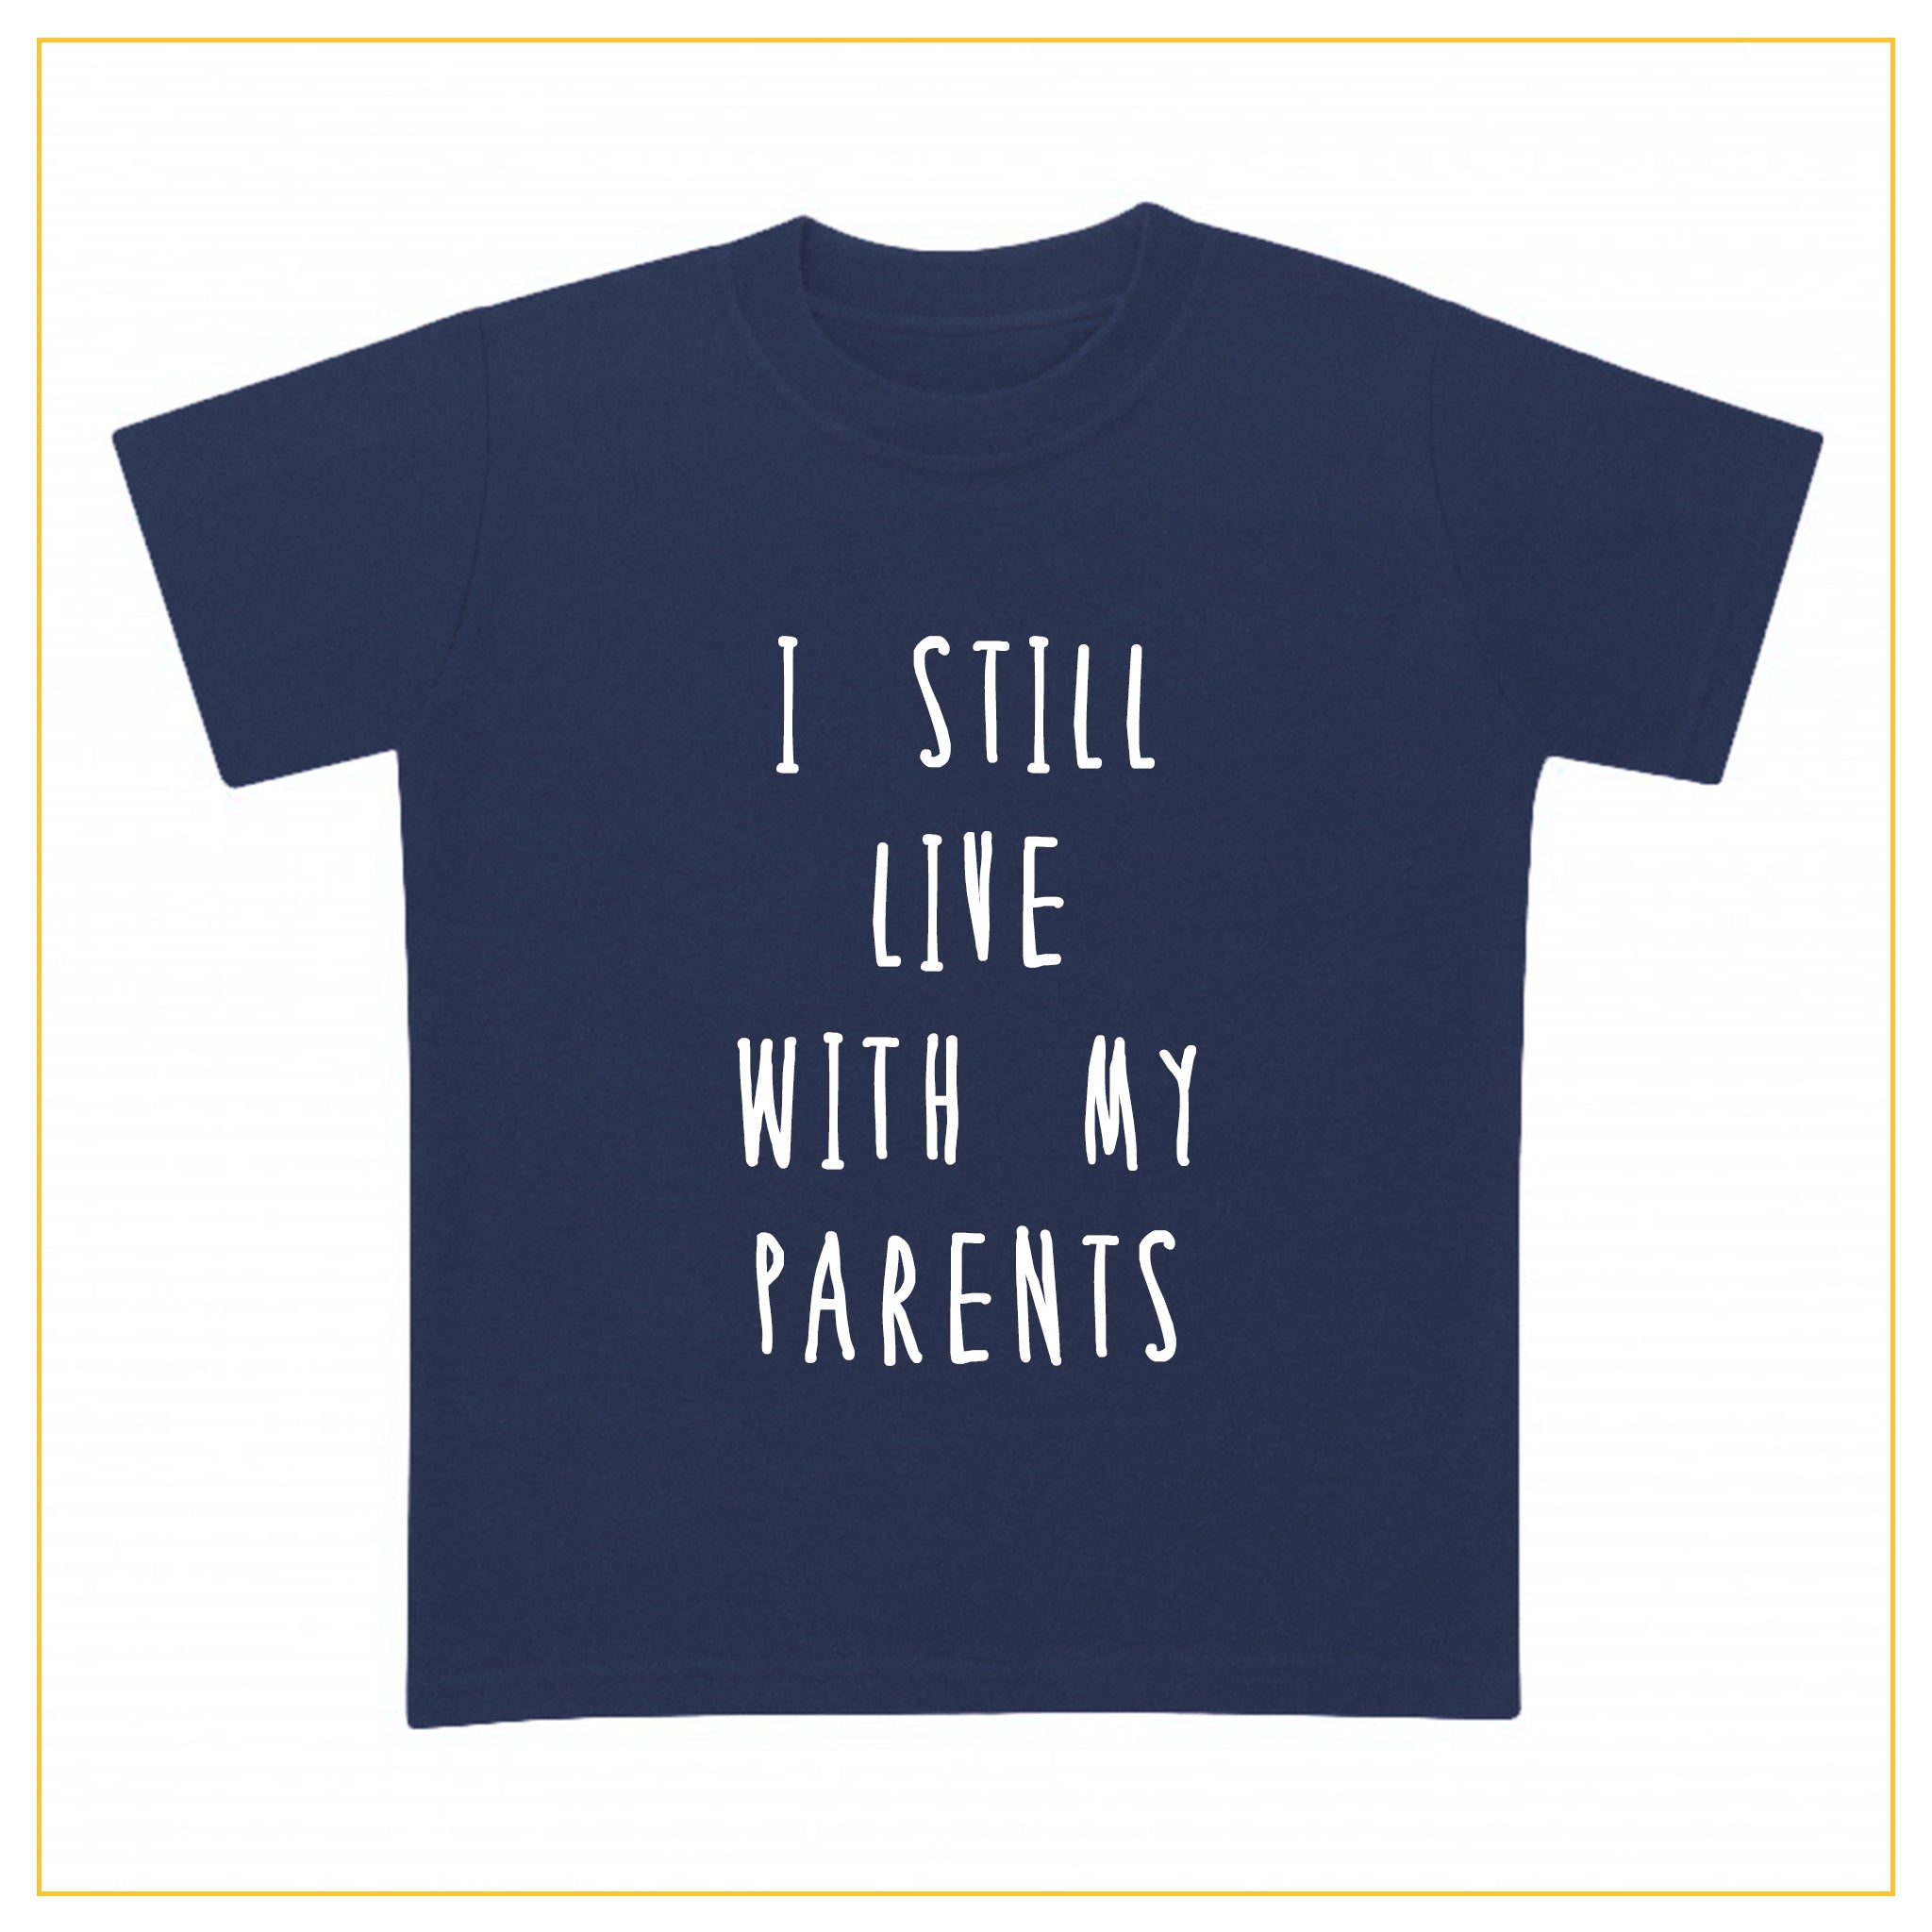 I still live with my parents kids novelty t-shirt in navy blue